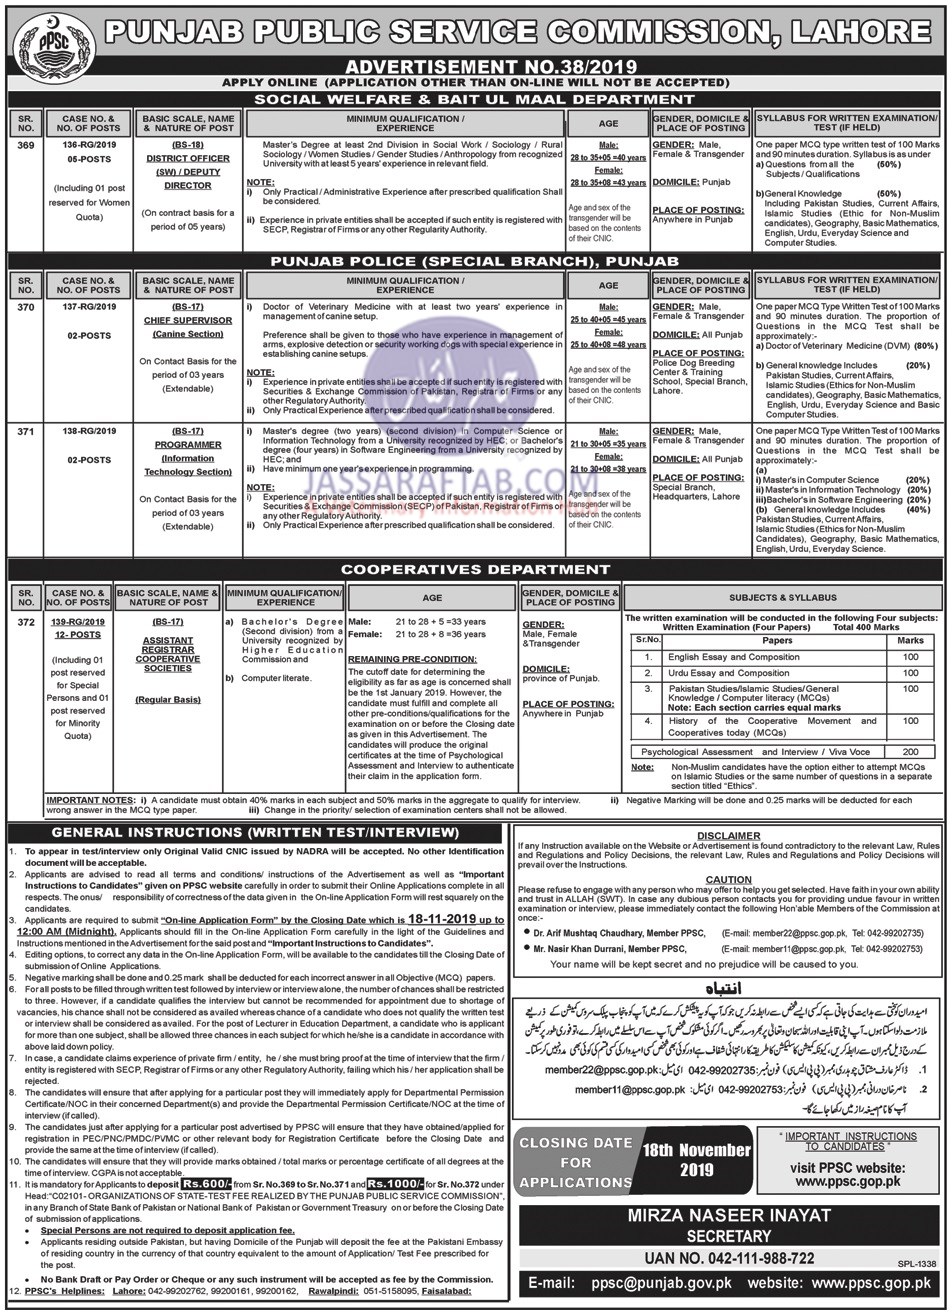 Punjab Police Veterinary Jobs. Jobs for veterinary professionals in Punjab Police